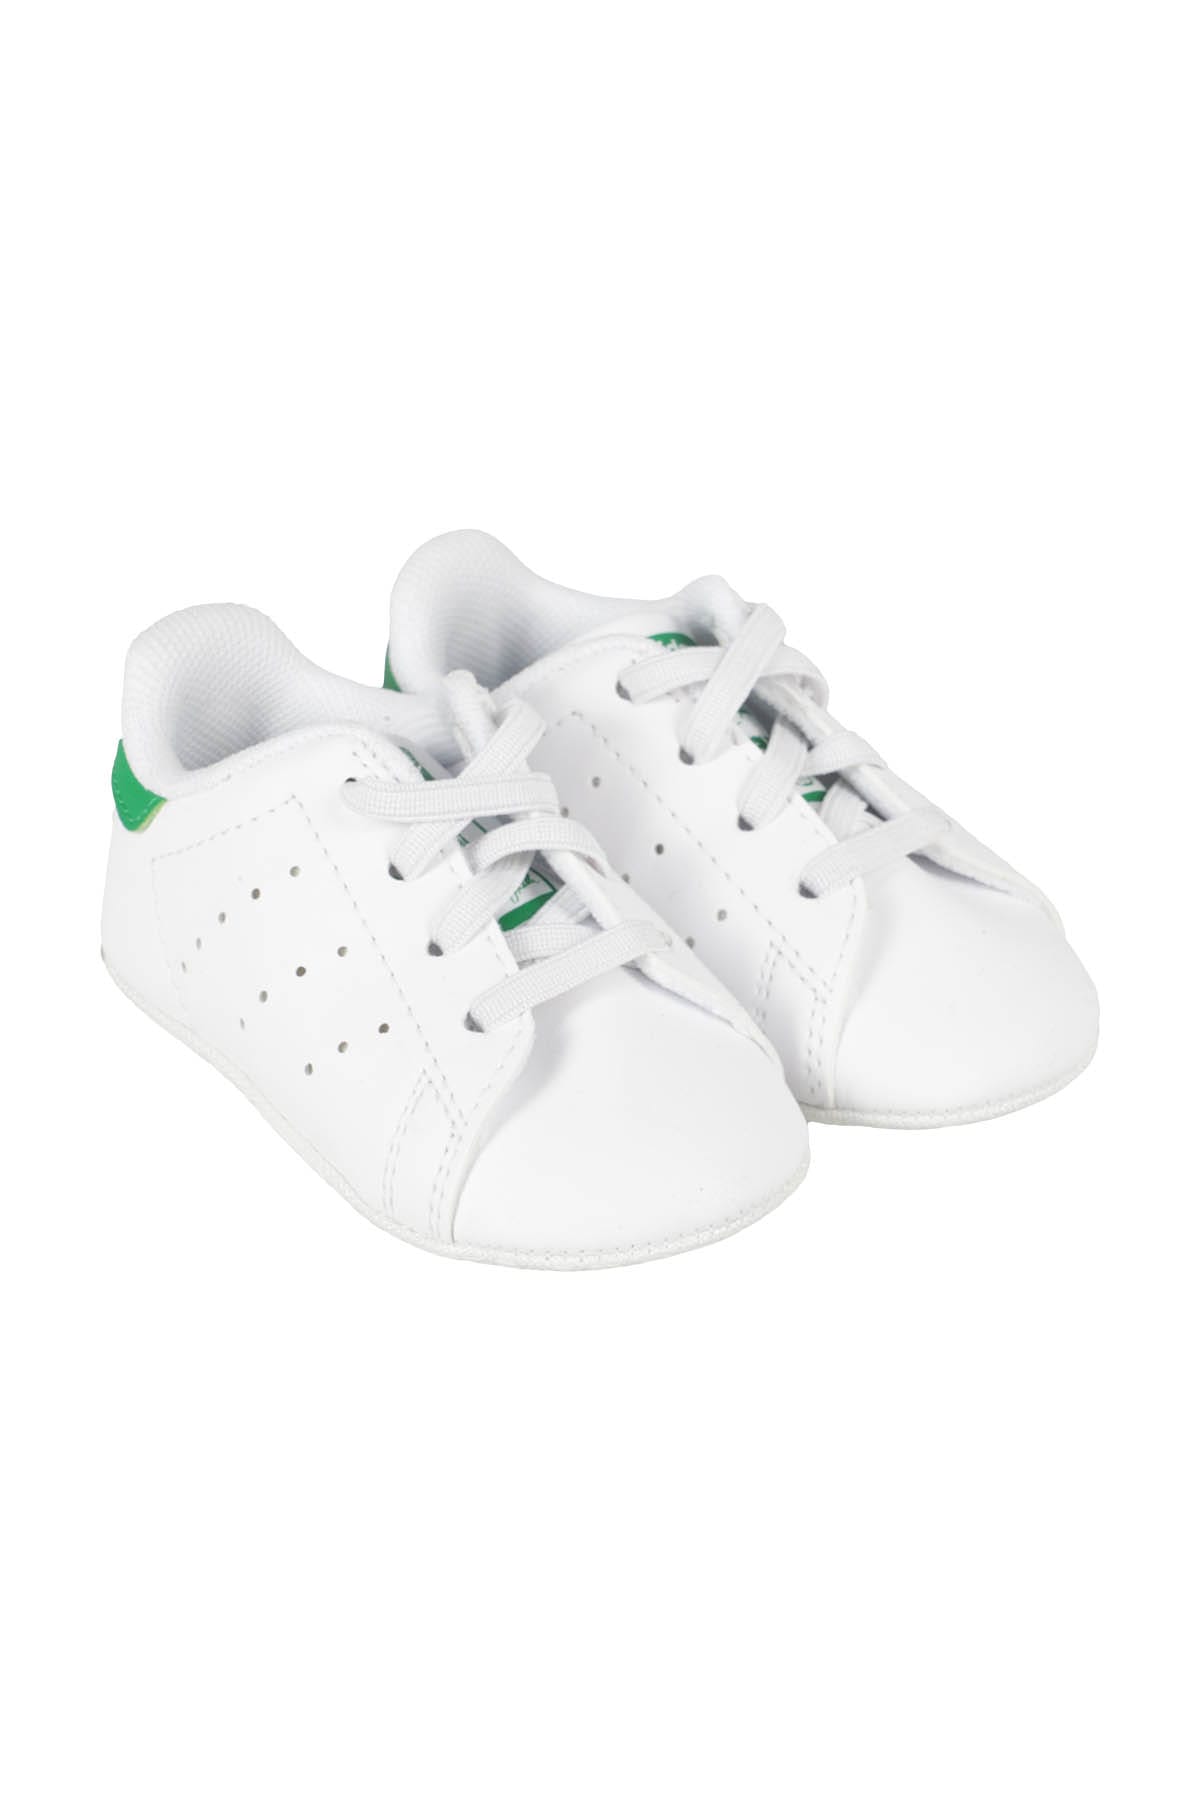 Adidas Originals Kids' Stan Smith Crib Faux Leather Sneakers In White